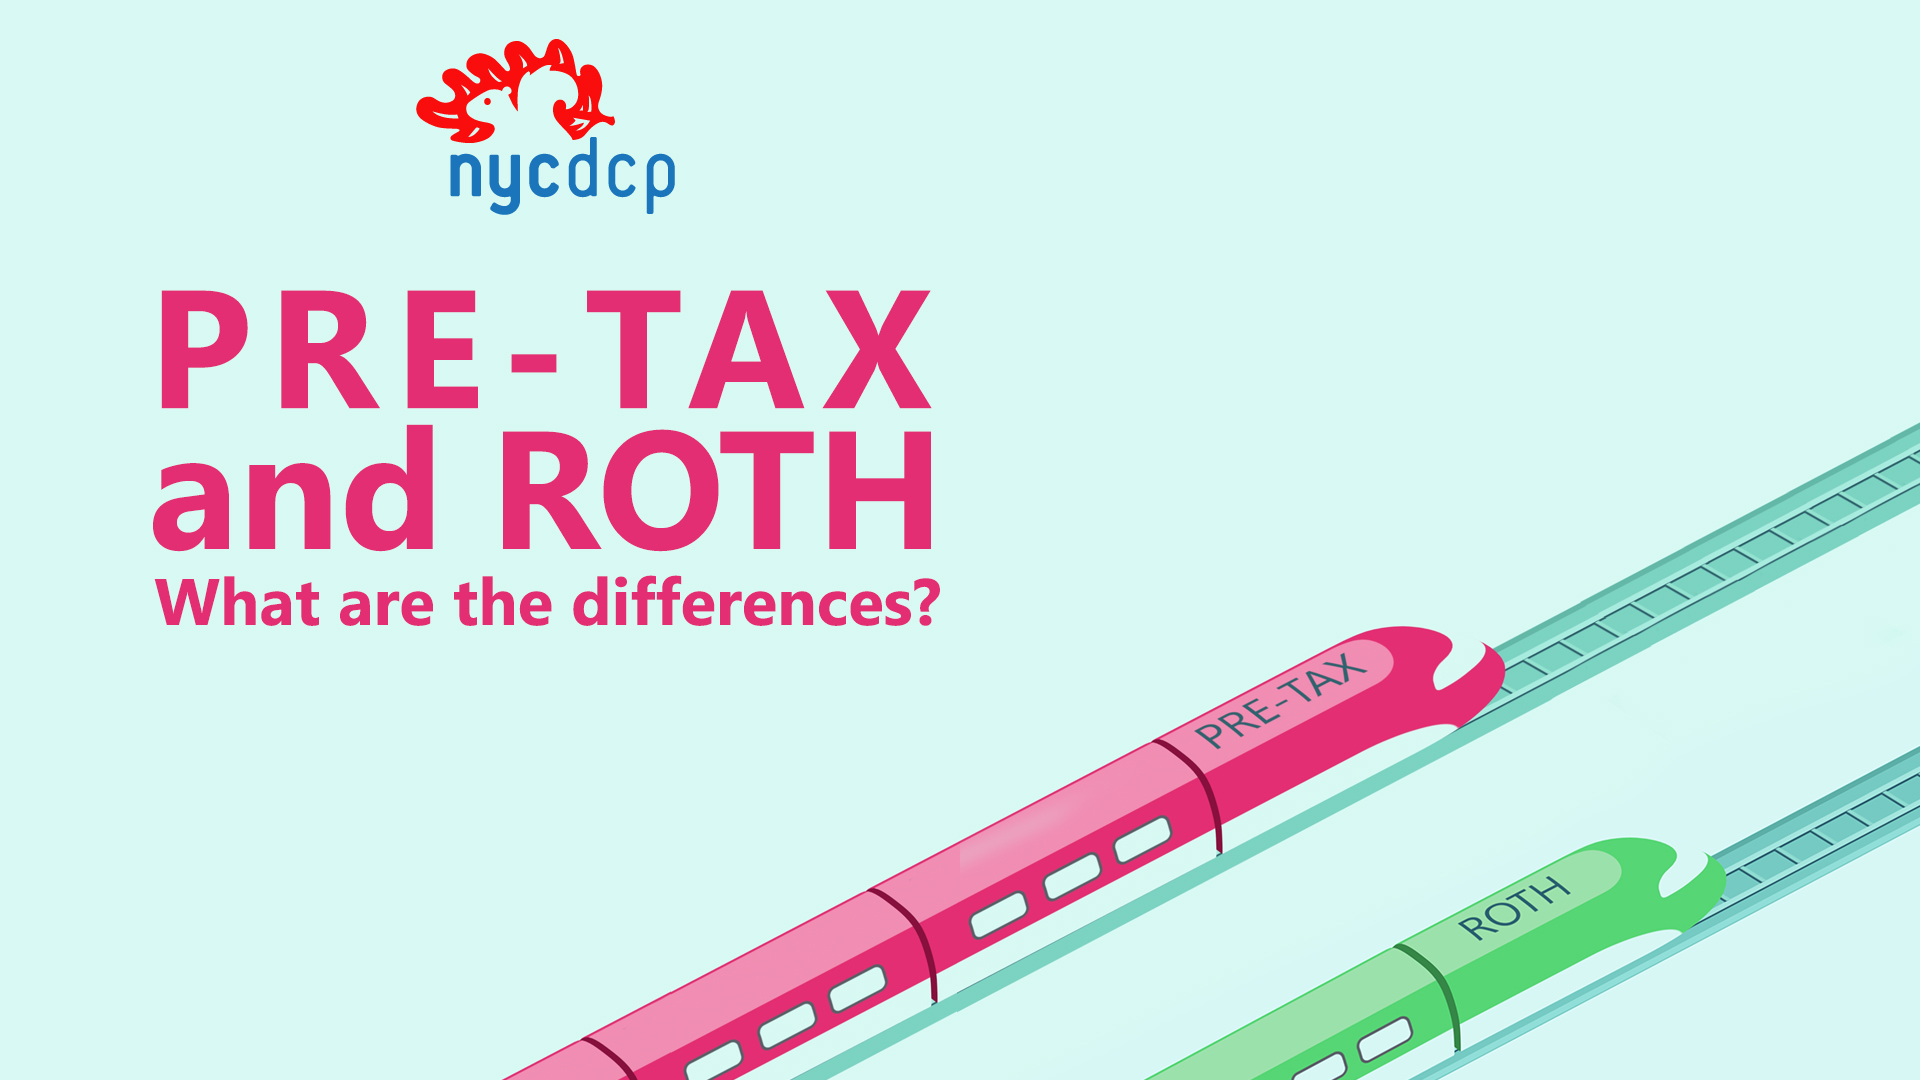 Differences between Pre-tax and Roth